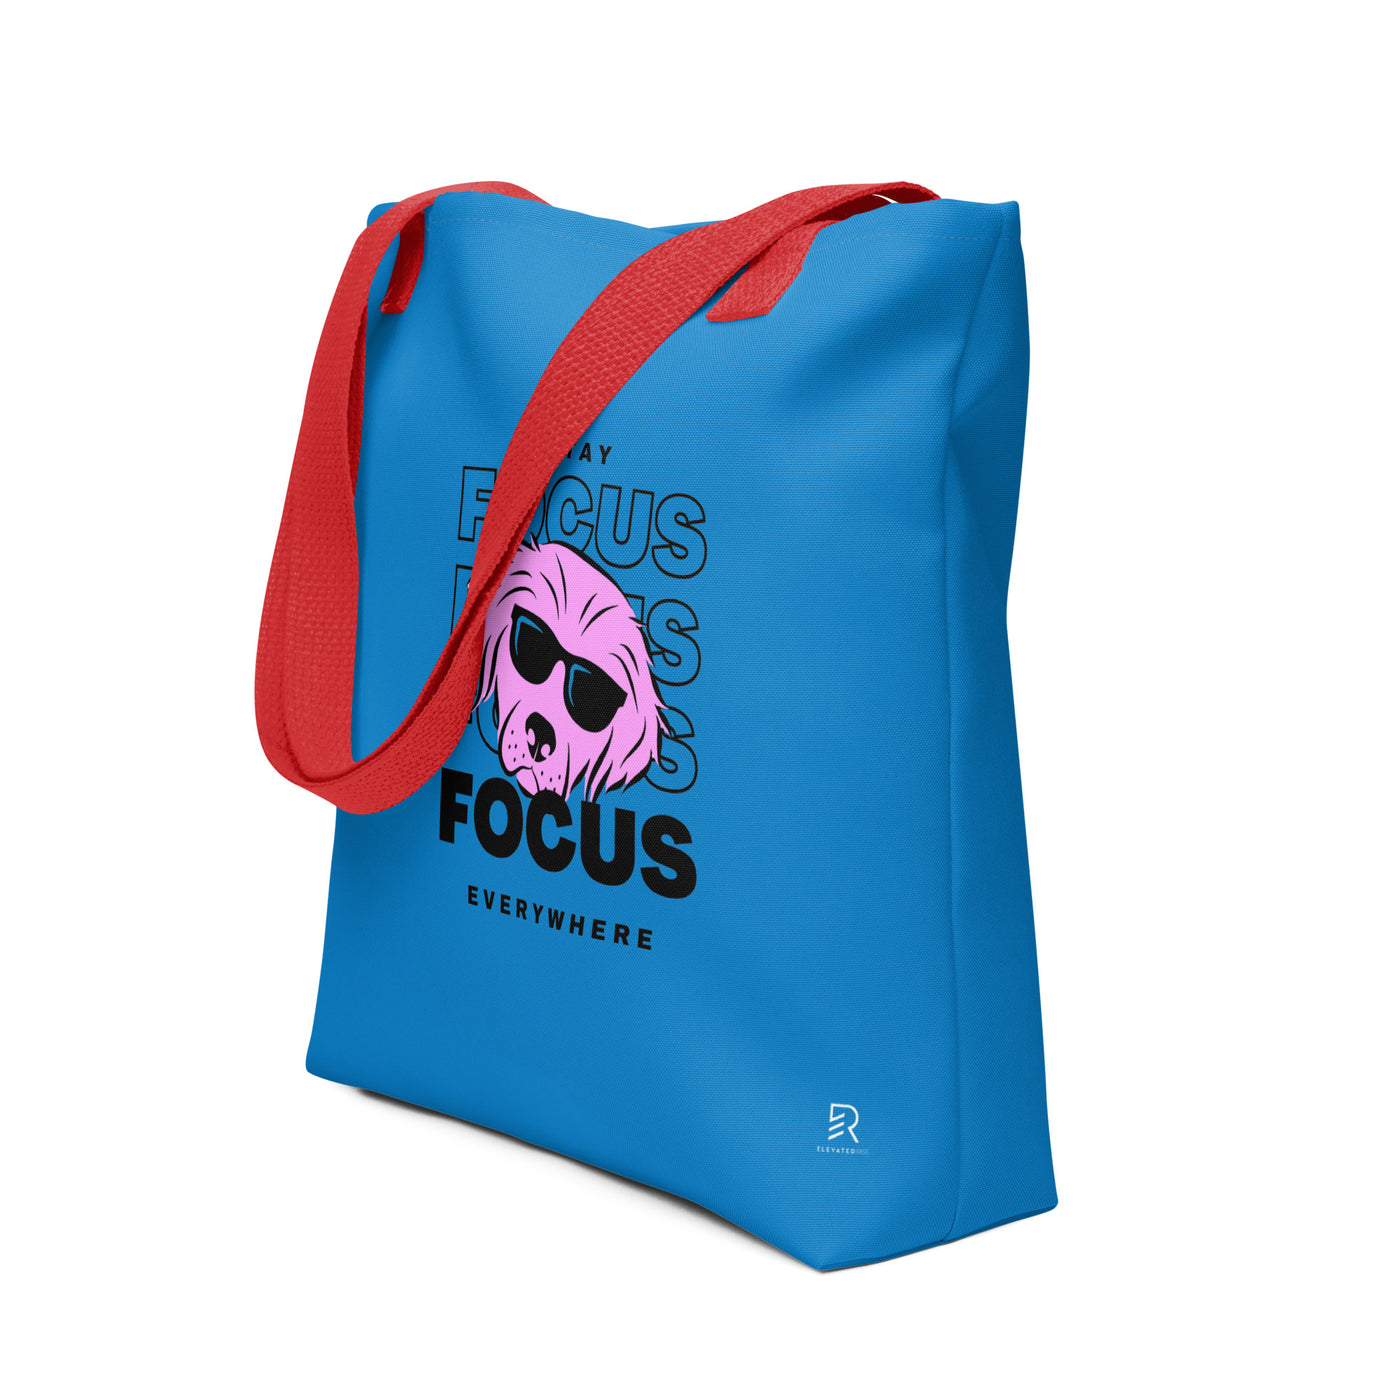 Navy Blue Tote Bag with Red Handle - Focus Everywhere